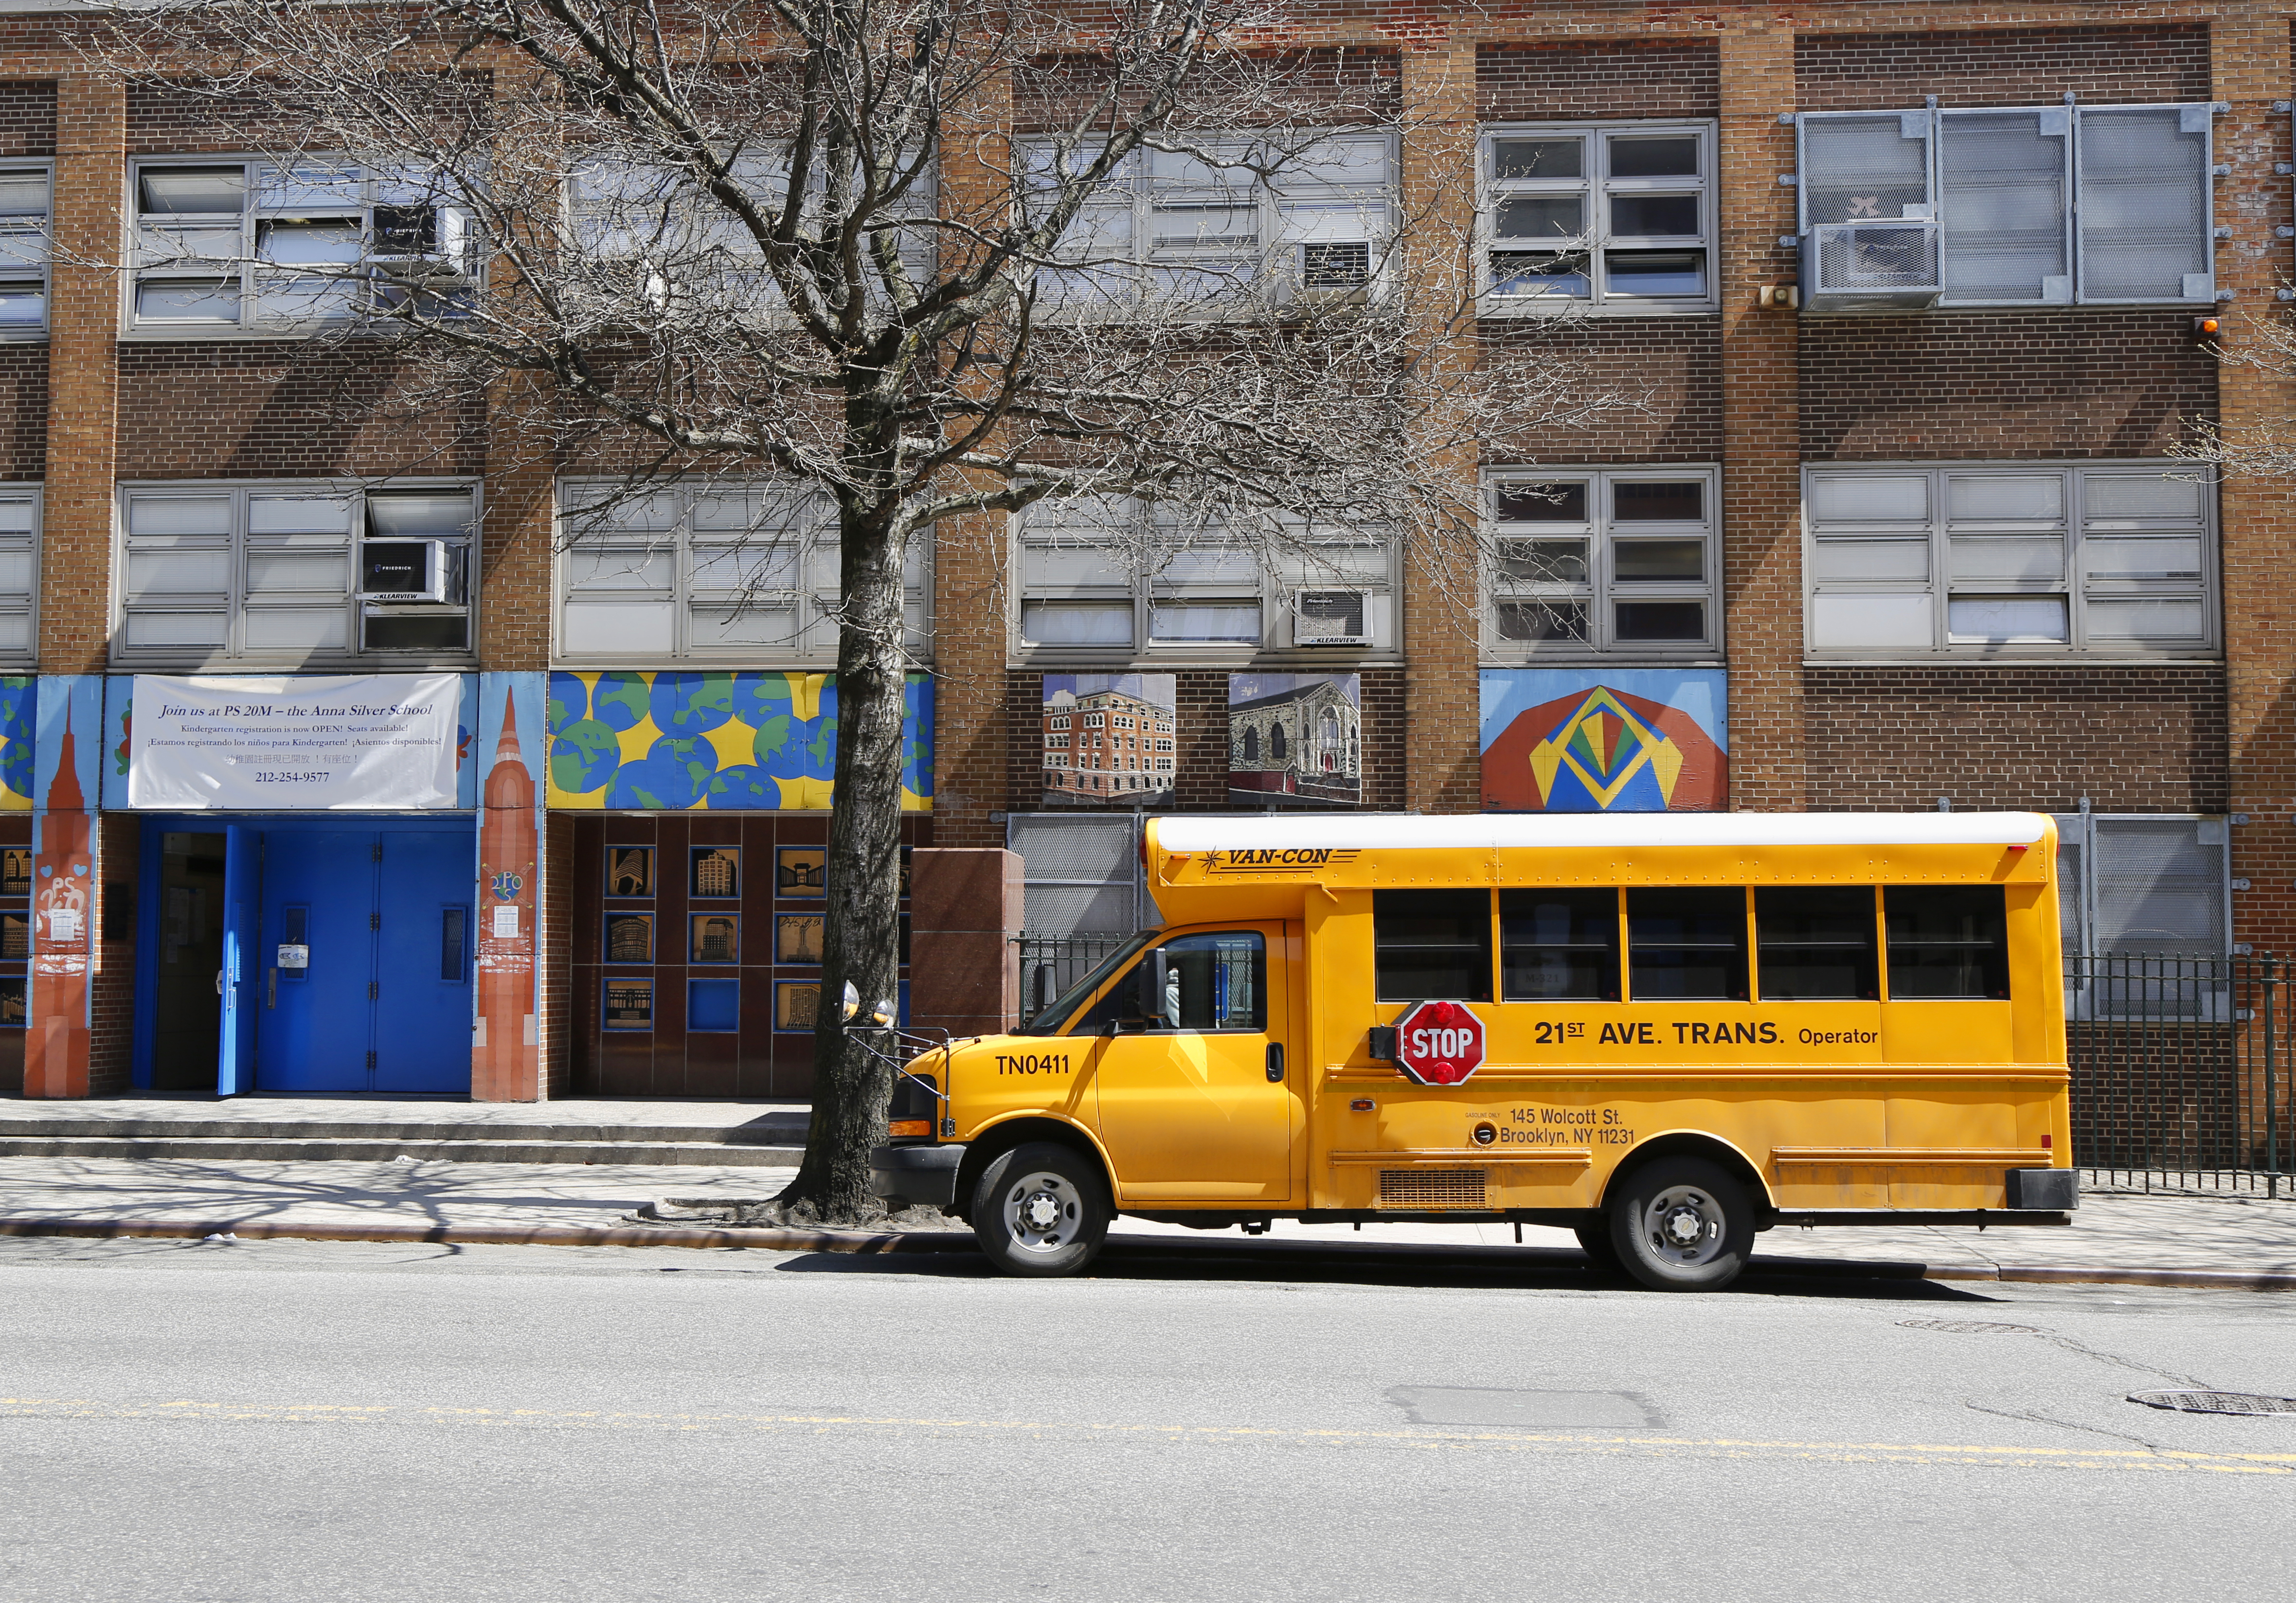 Where charter schools are built shows our commitment to integration